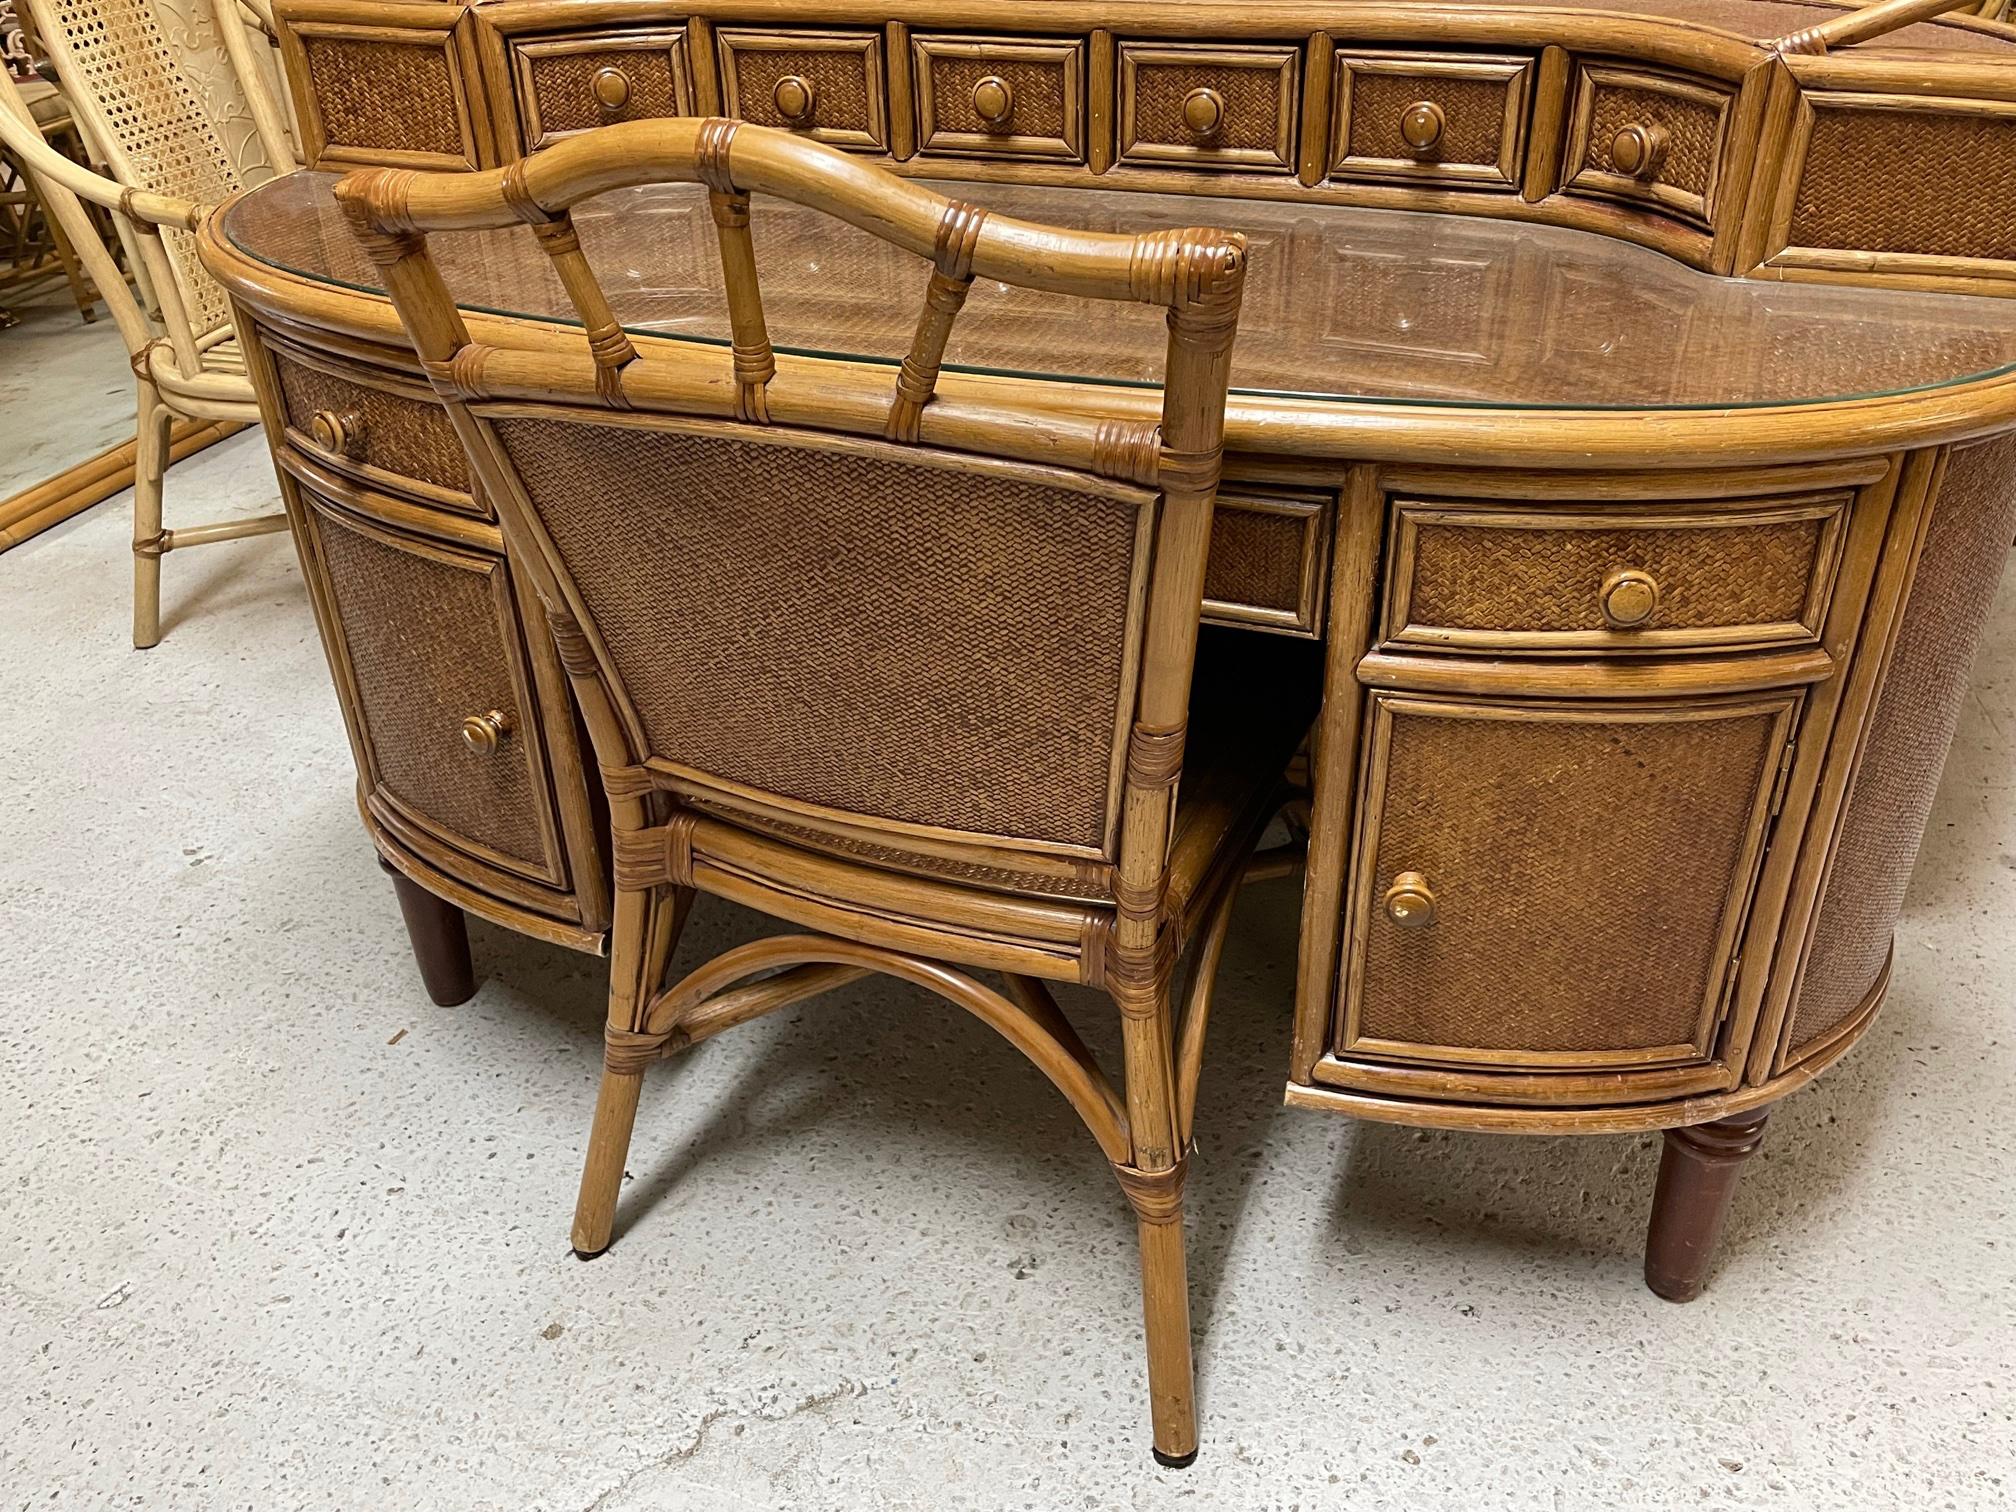 Oval secretary desk features rattan and wood construction and veneers of woven wicker in a herringbone pattern. Includes matching chair and custom cut glass top.
Measures 56